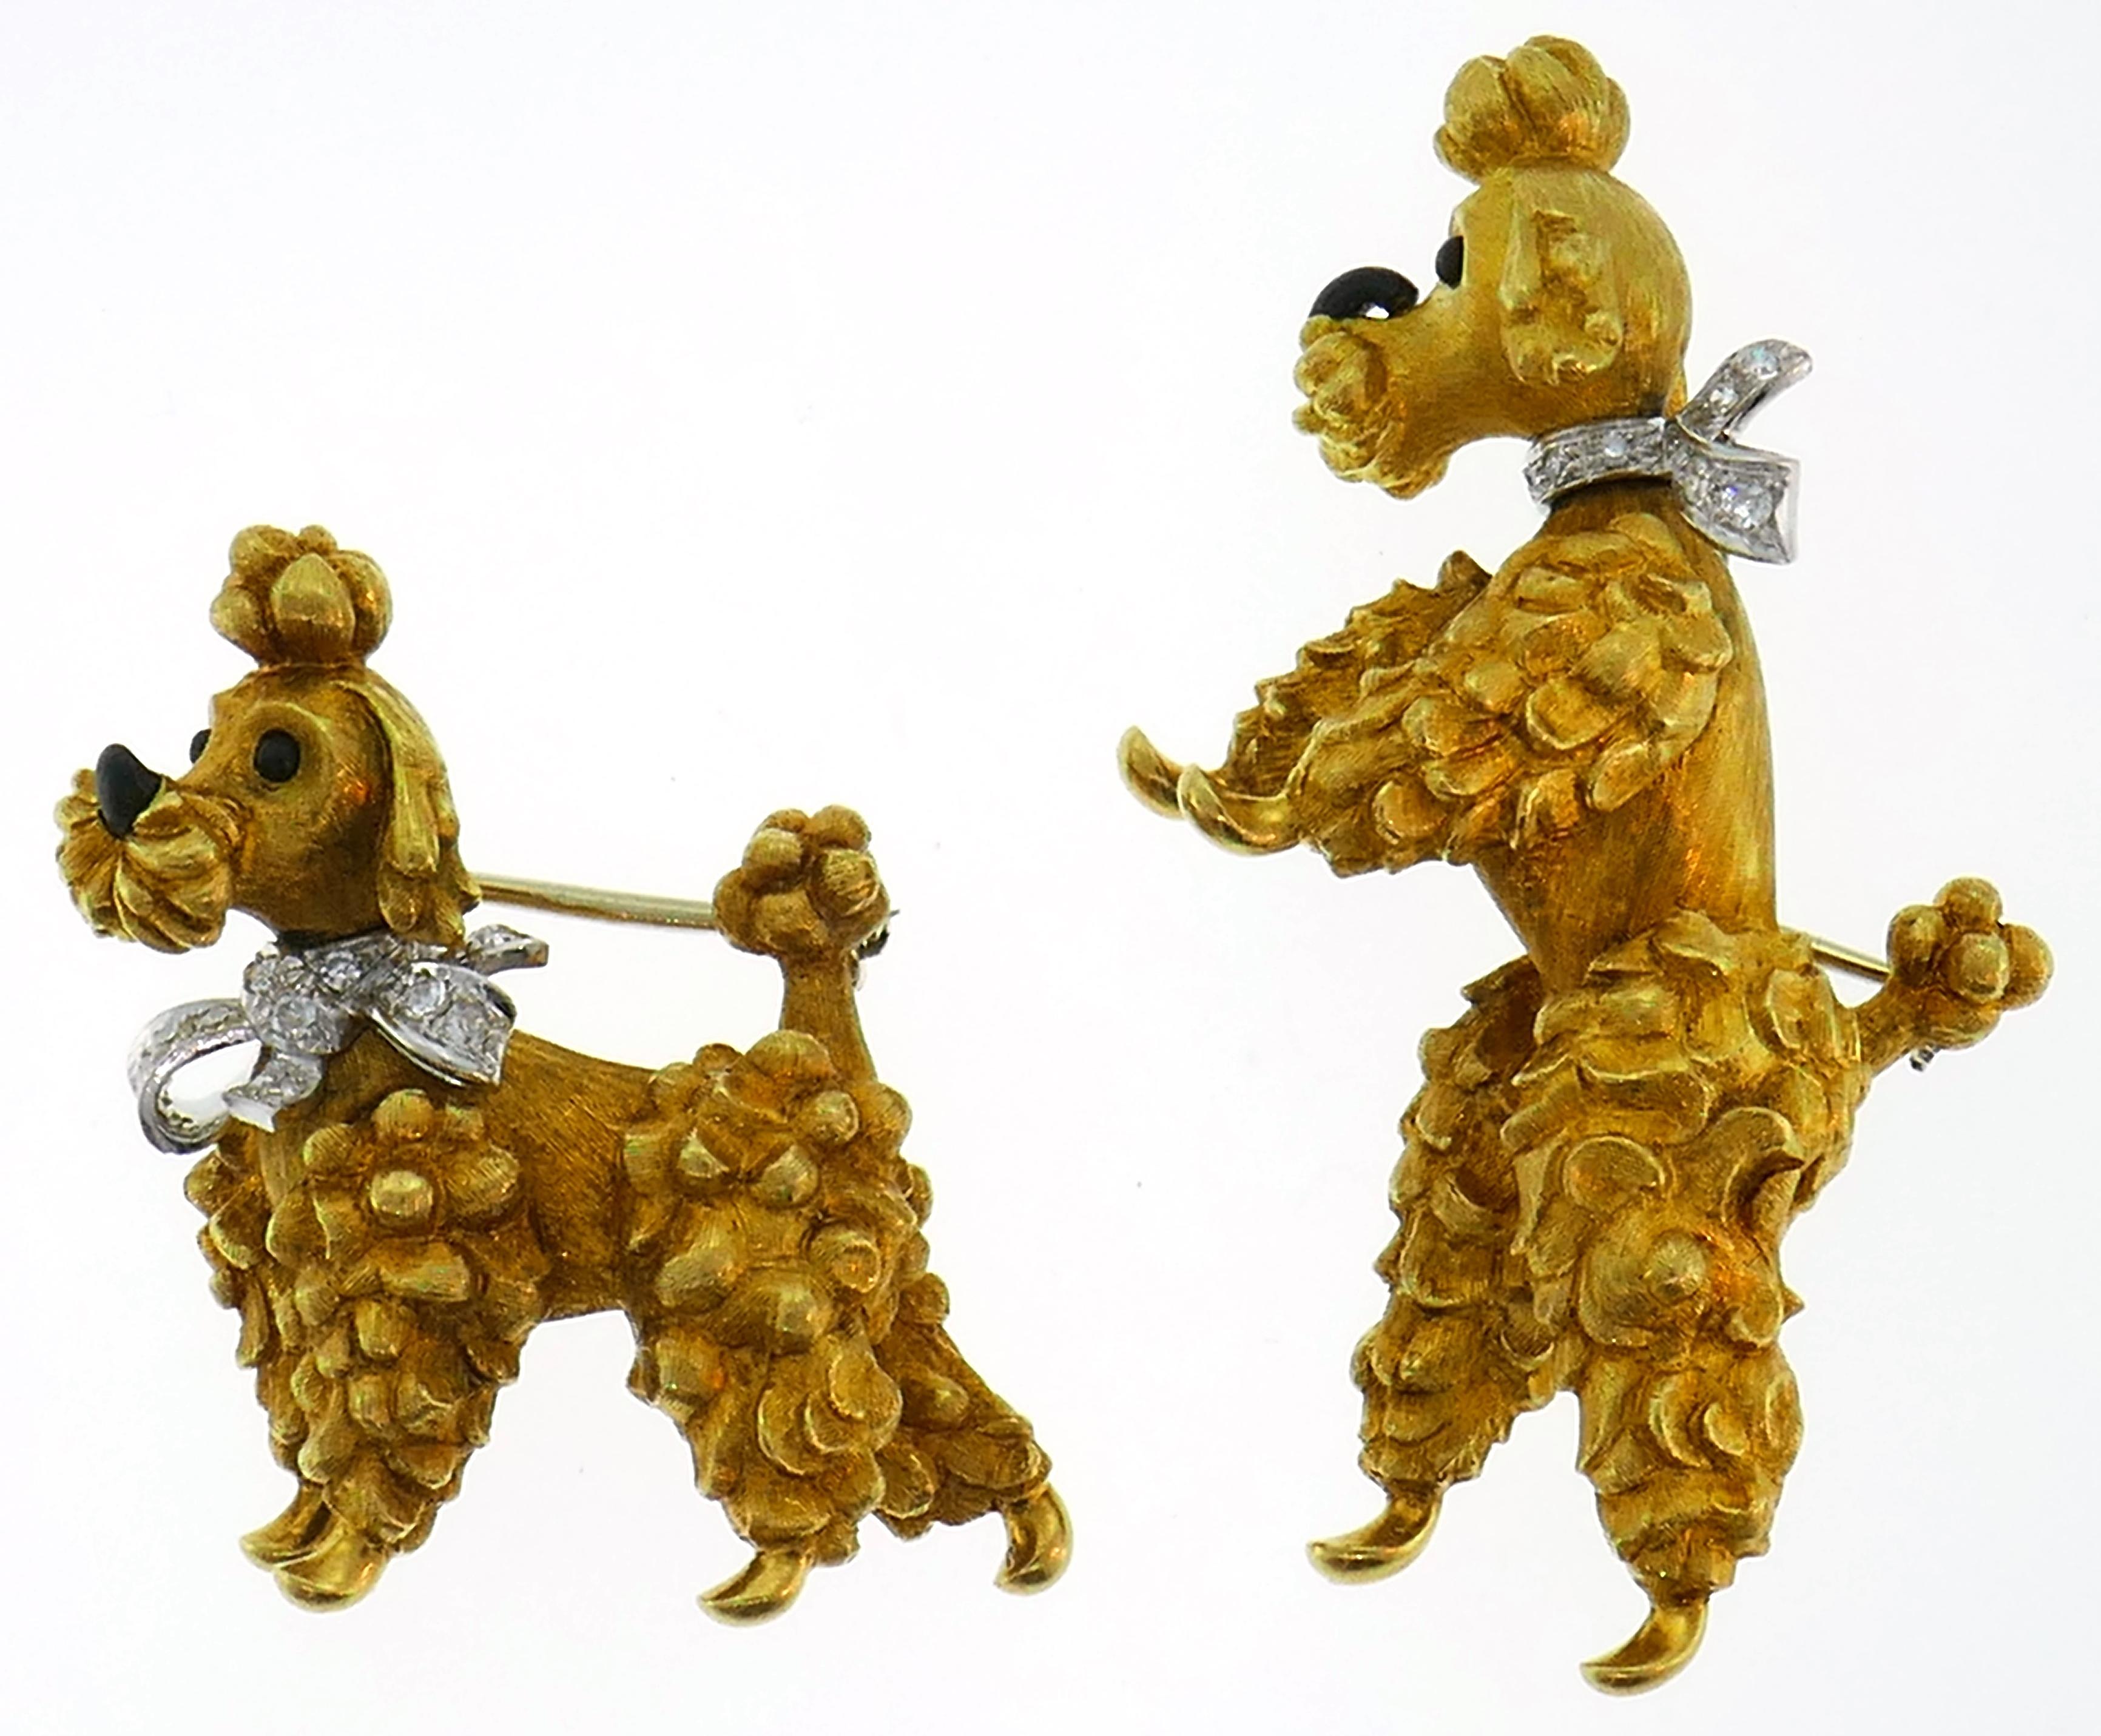 A pair of iconic poodle pins created by Cartier in Italy in the 1950s. Definitely a conversational piece, cute and joyful, the pair is a great addition to your jewelry collection.

The pins are made of 18 karat (stamped) yellow gold, the poodles'